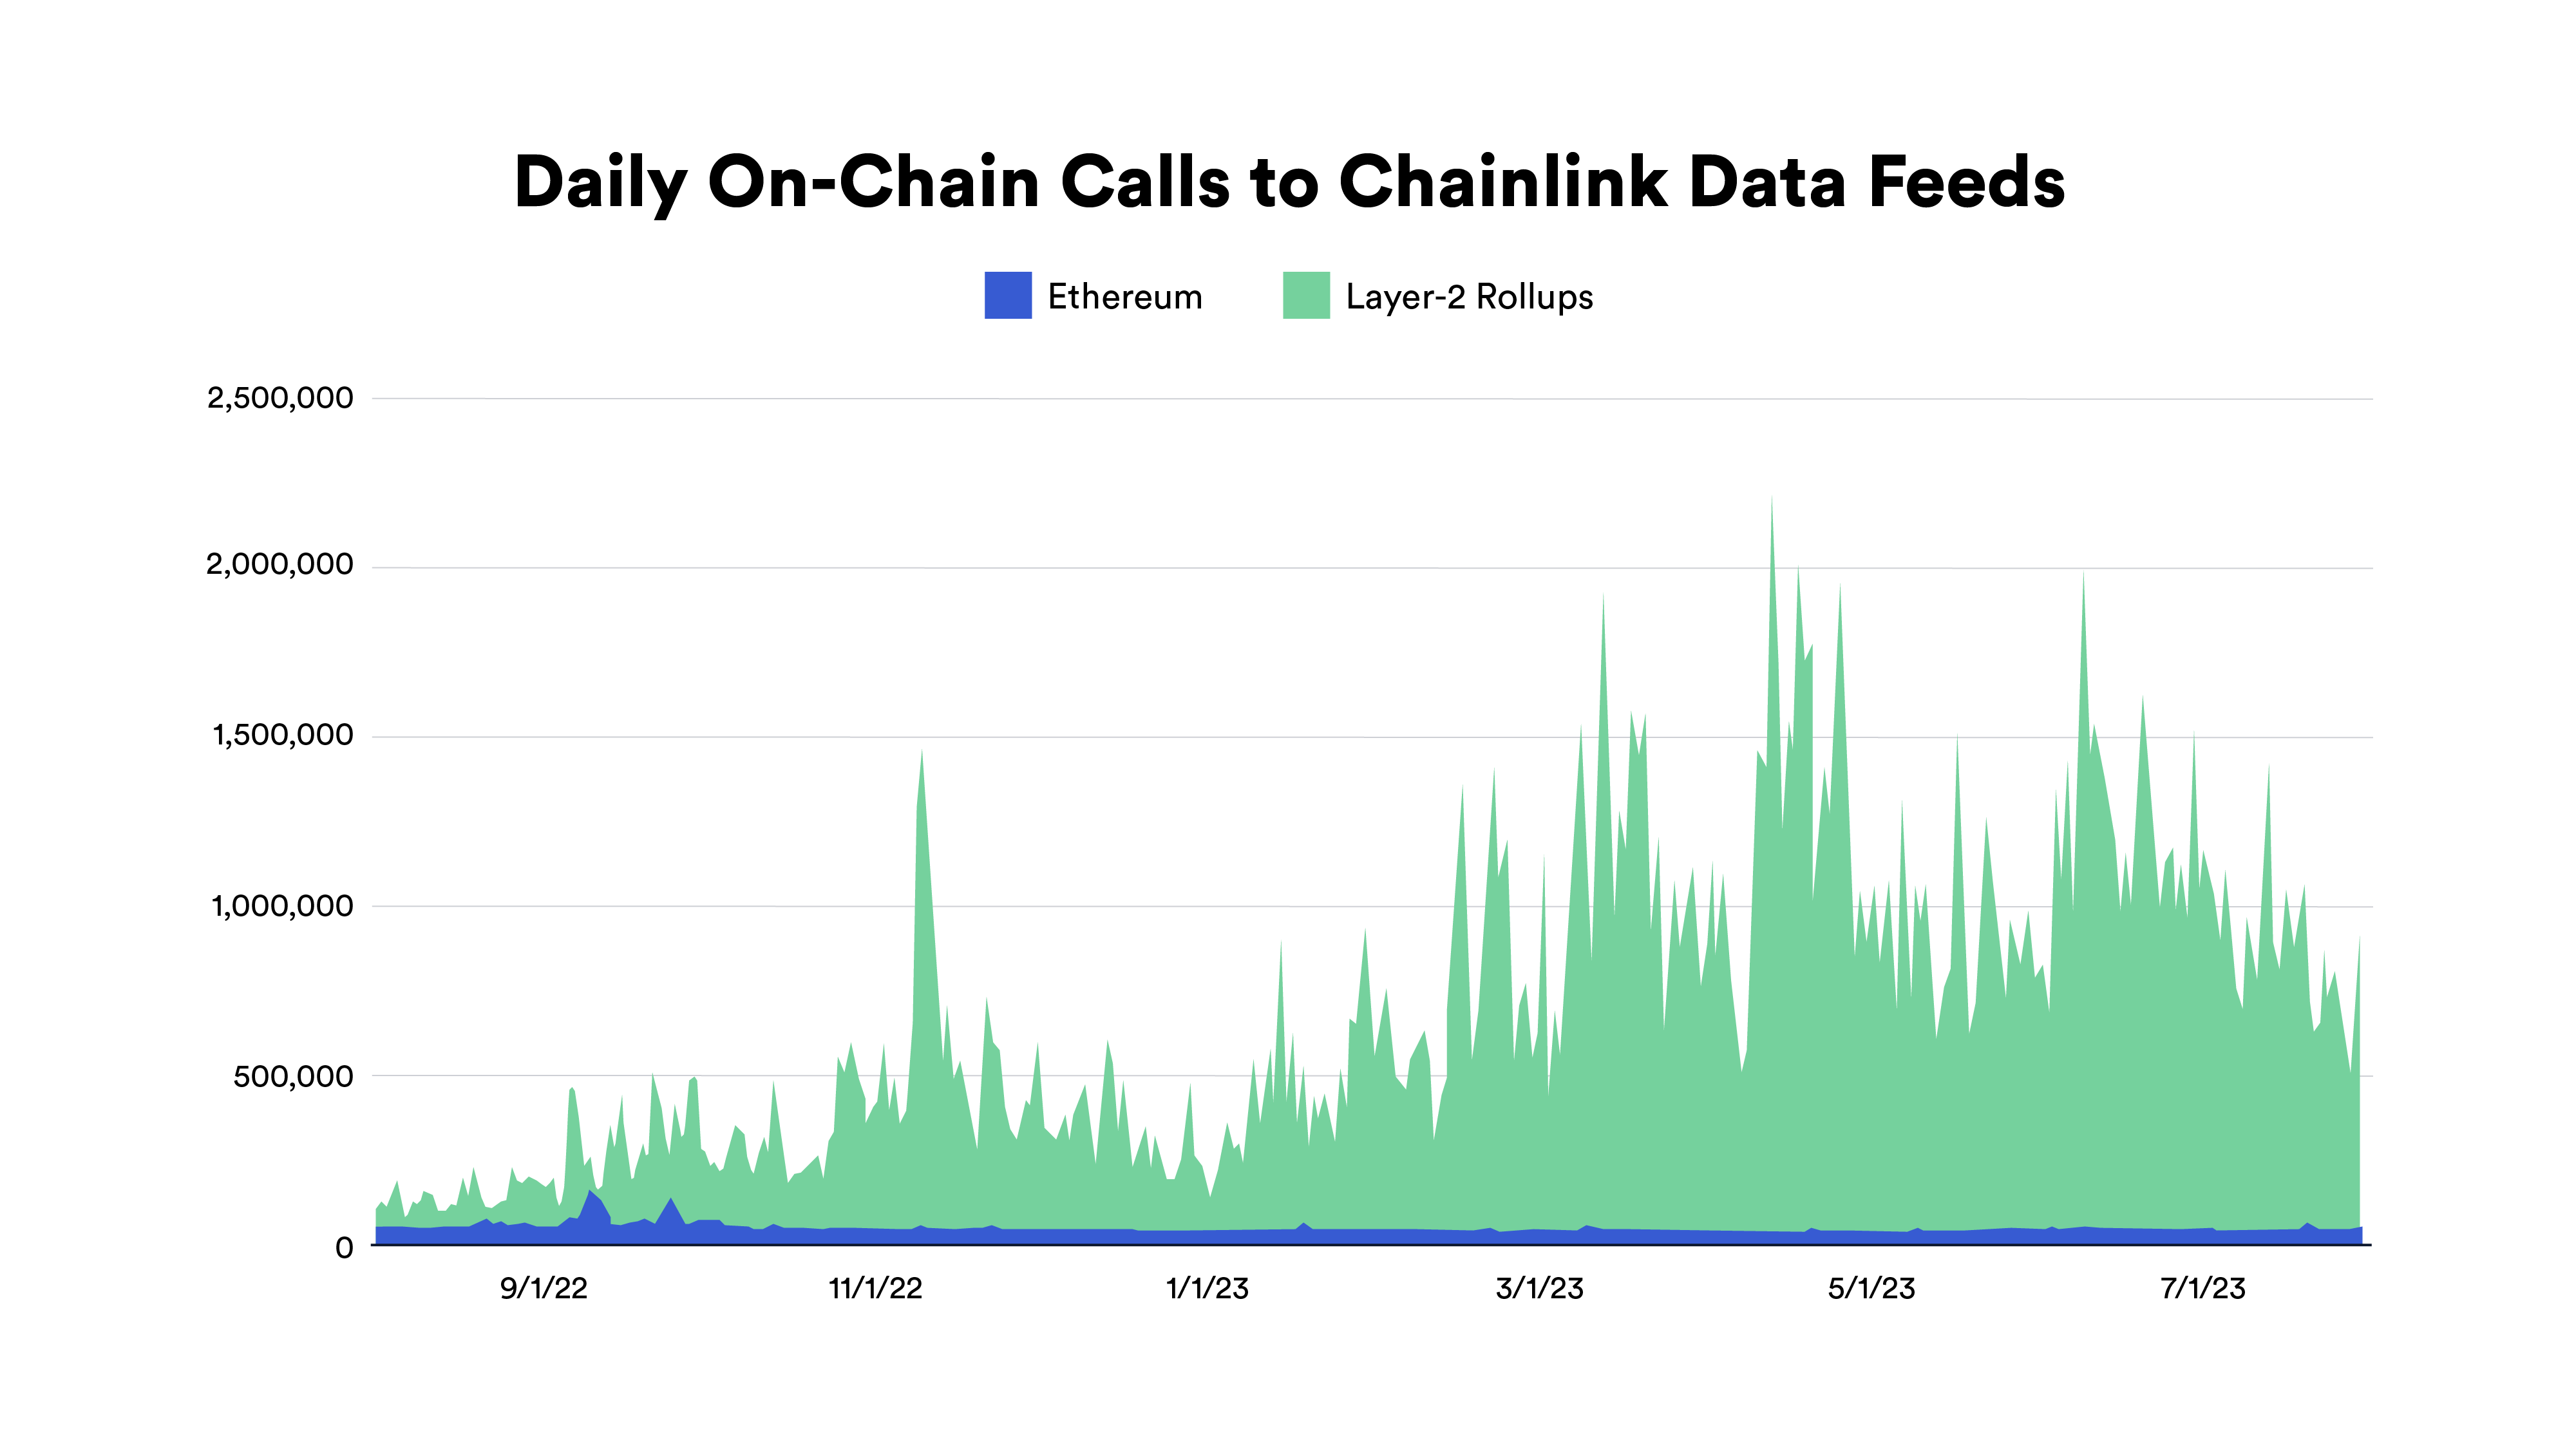 Daily On-Chain Calls to Chainlink Data Feeds